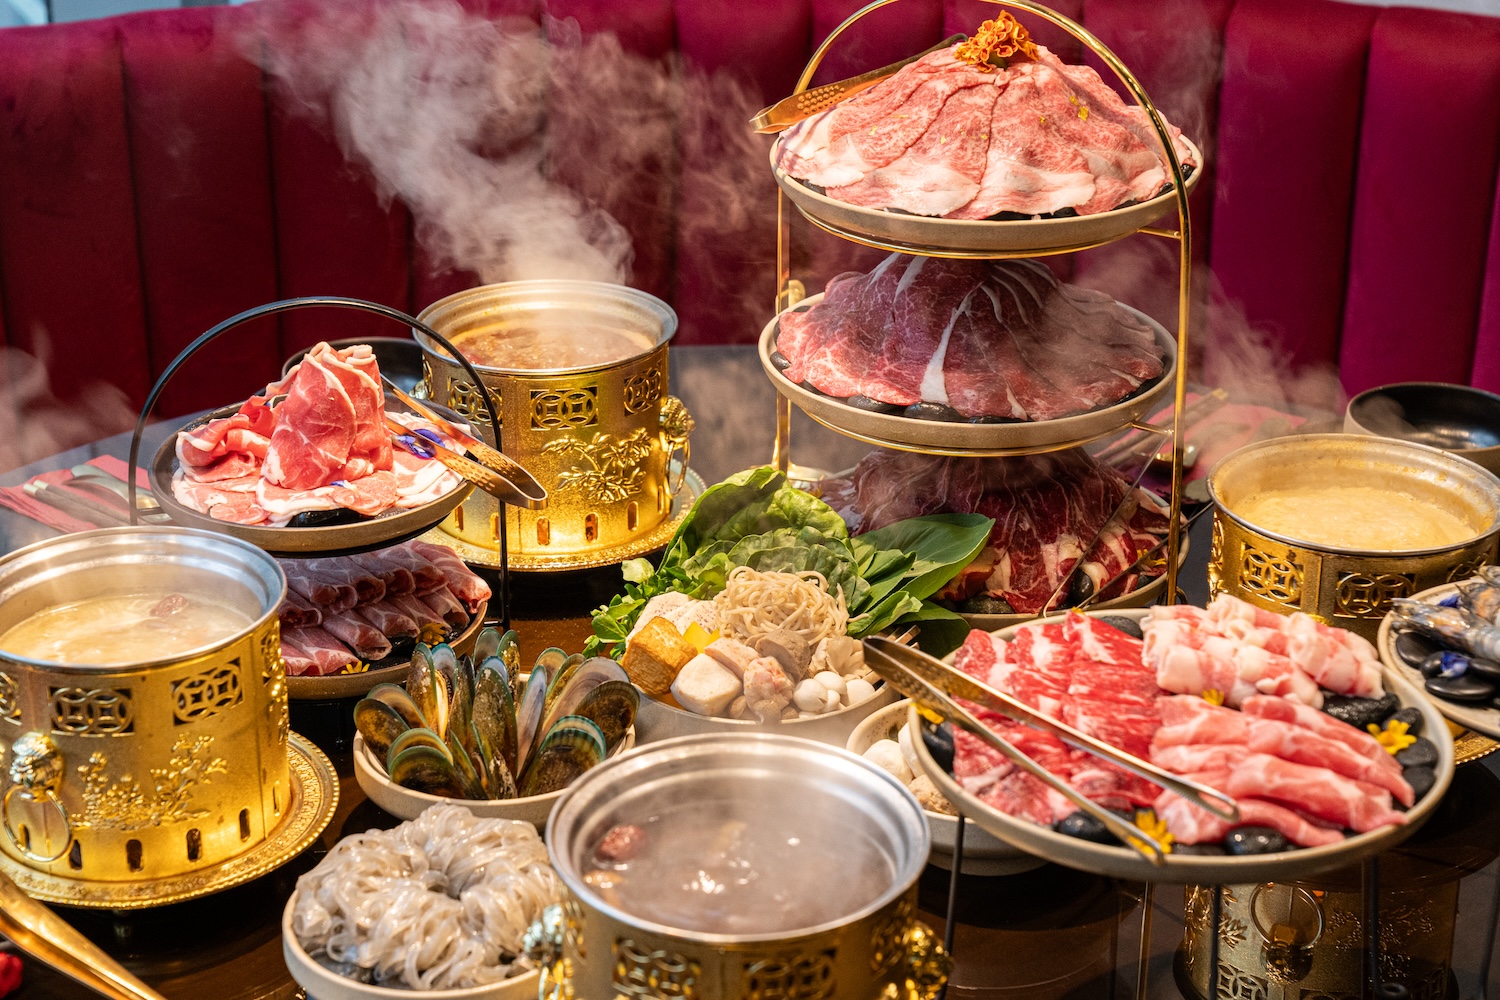 Love hot pot? Chairman FU will put you in the hot seat—in the best way possible